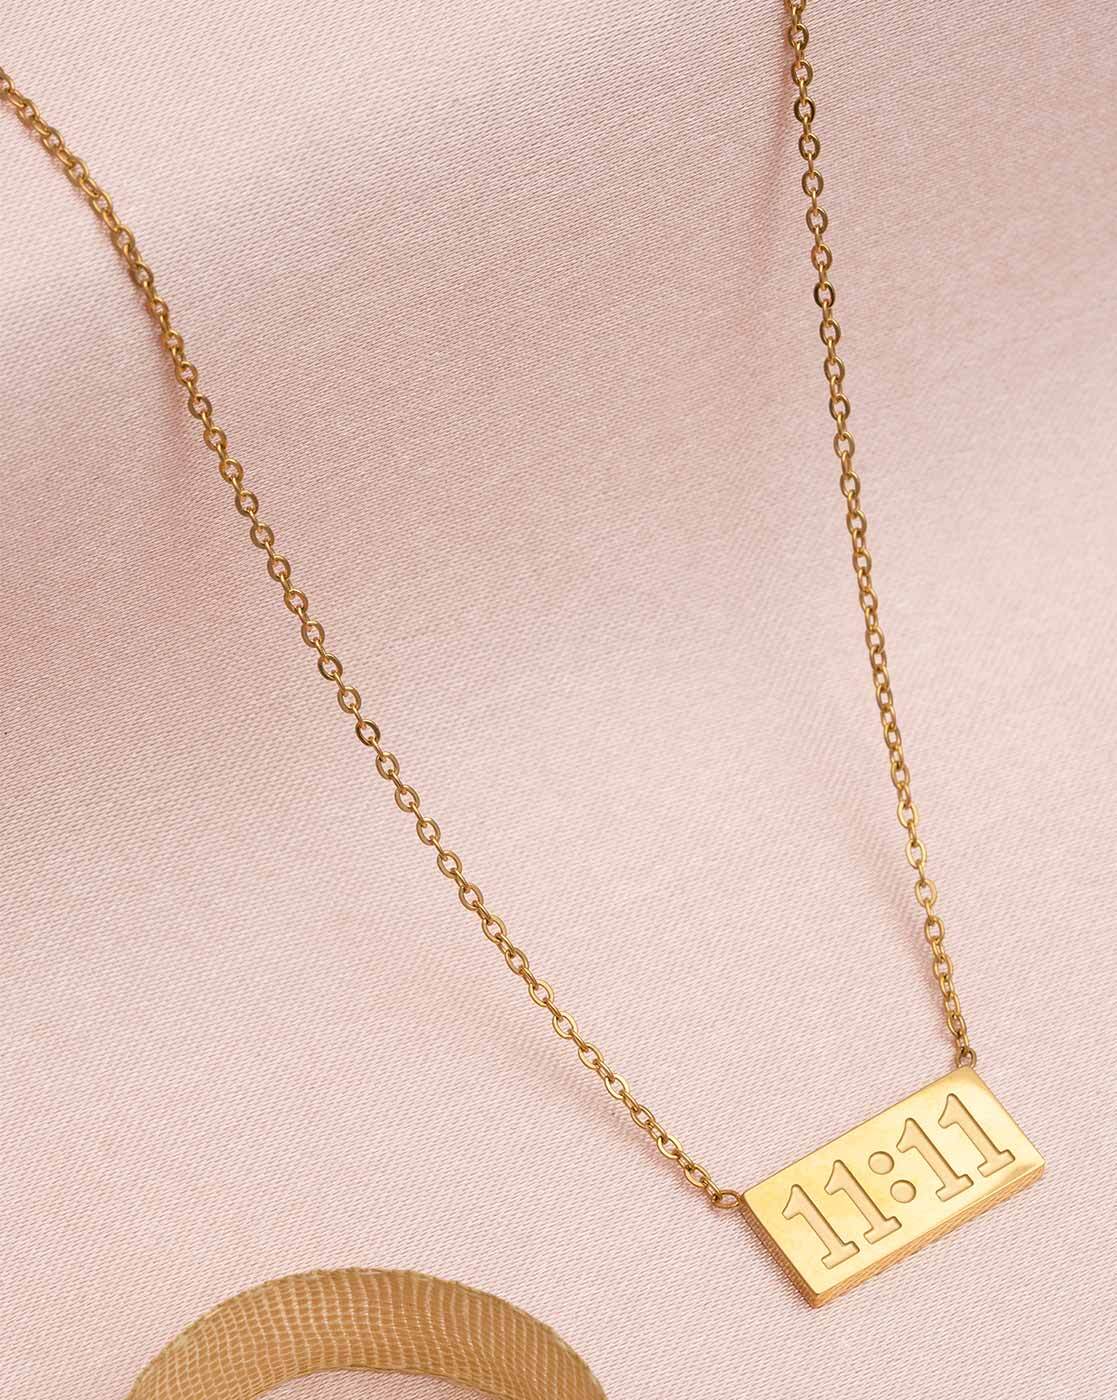 11:11 Necklace – The Envy House